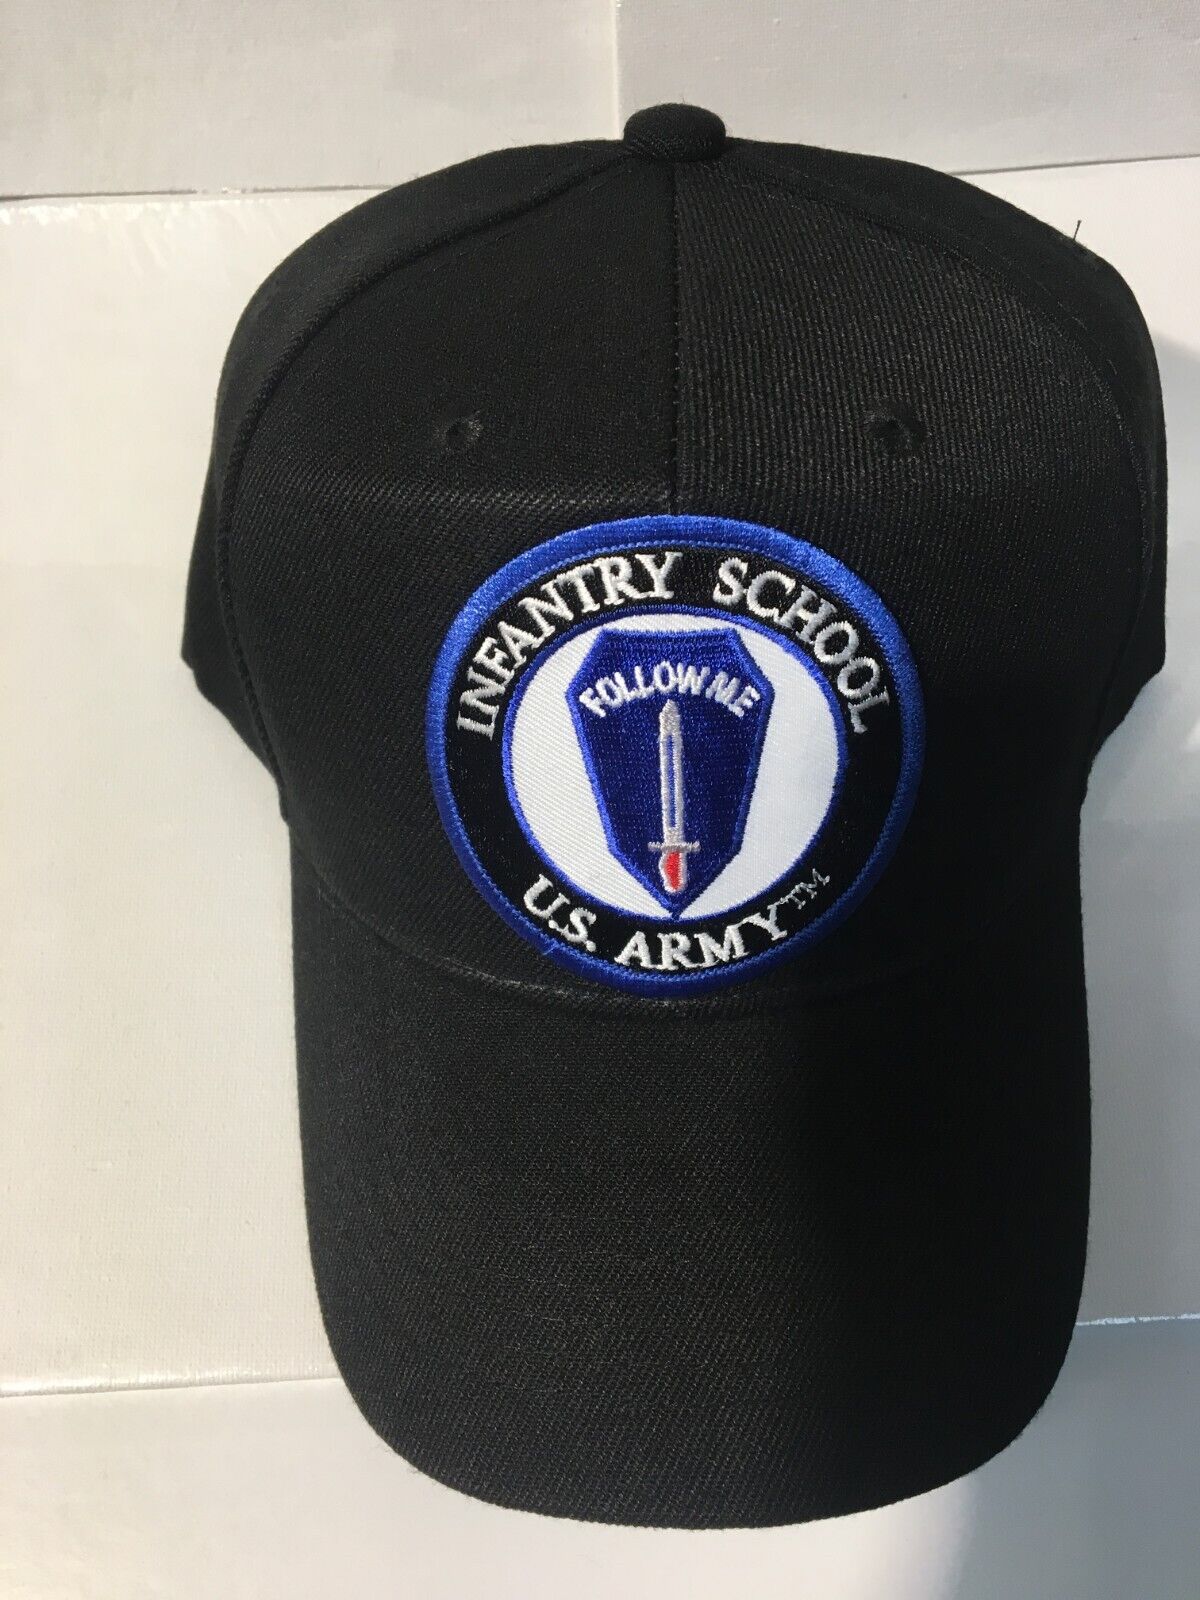 US ARMY INFANTRY SCHOOL (FORT BENNING) MILITARY HAT/CAP